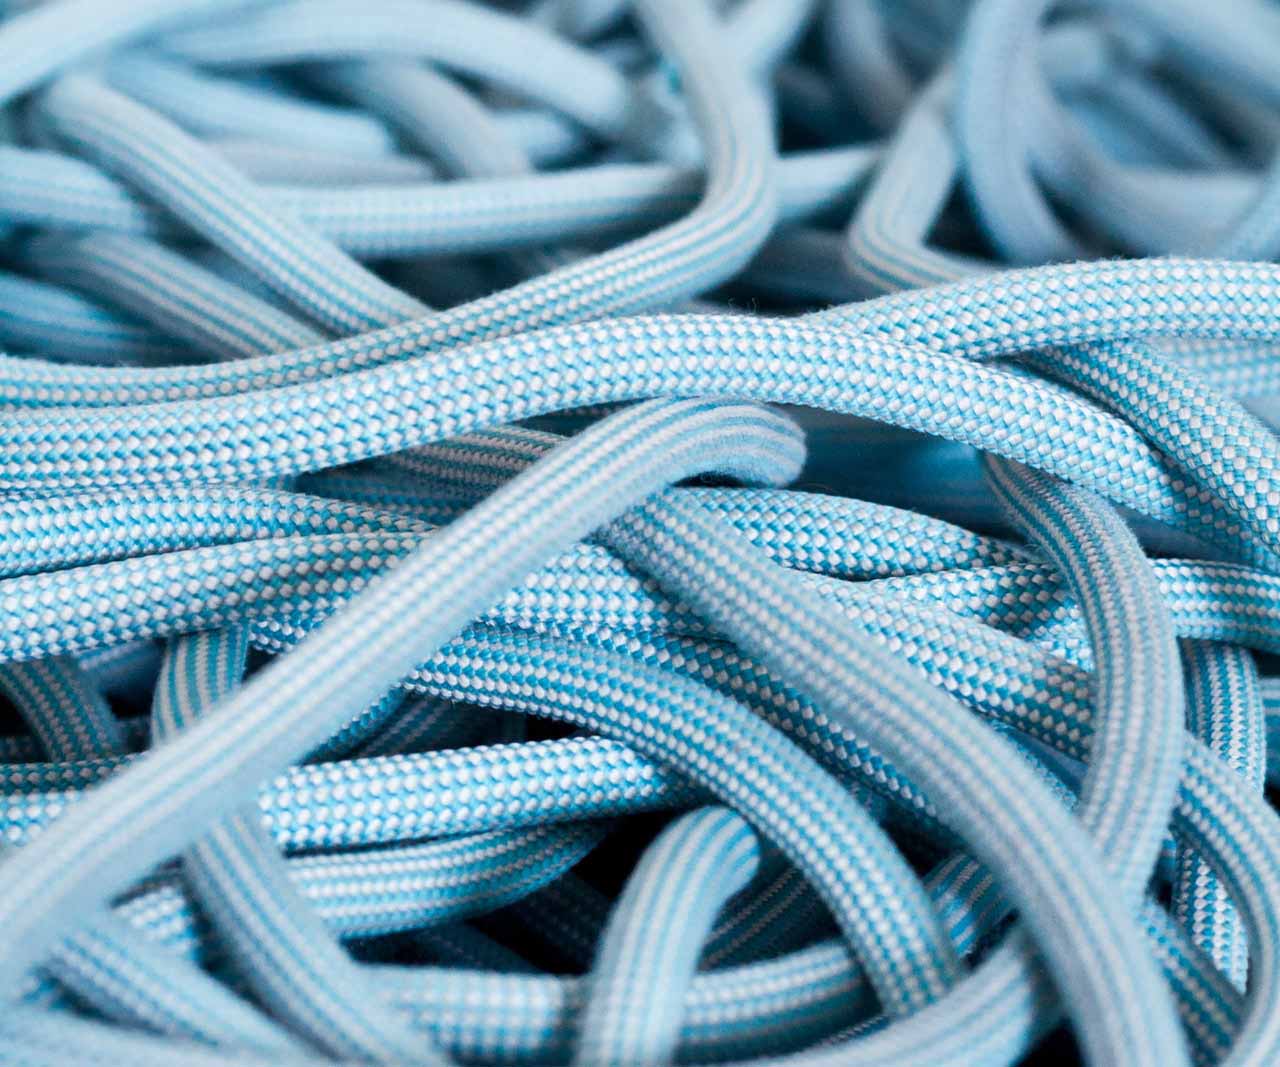 How to cut a climbing rope - Expert Climbers